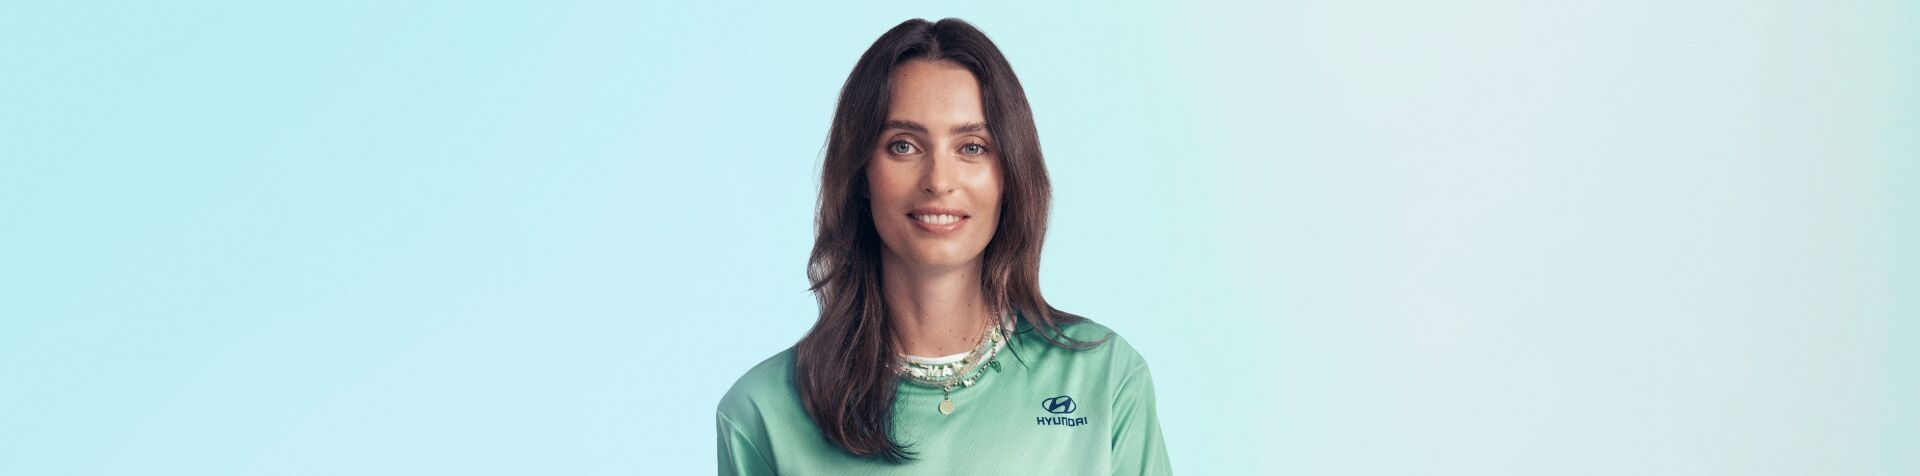 A close up of Ella Mills’ face. She is standing in front of a blue and green background and is wearing her green Team Century jersey and a couple of necklaces. She has long brown hair and blue eyes.